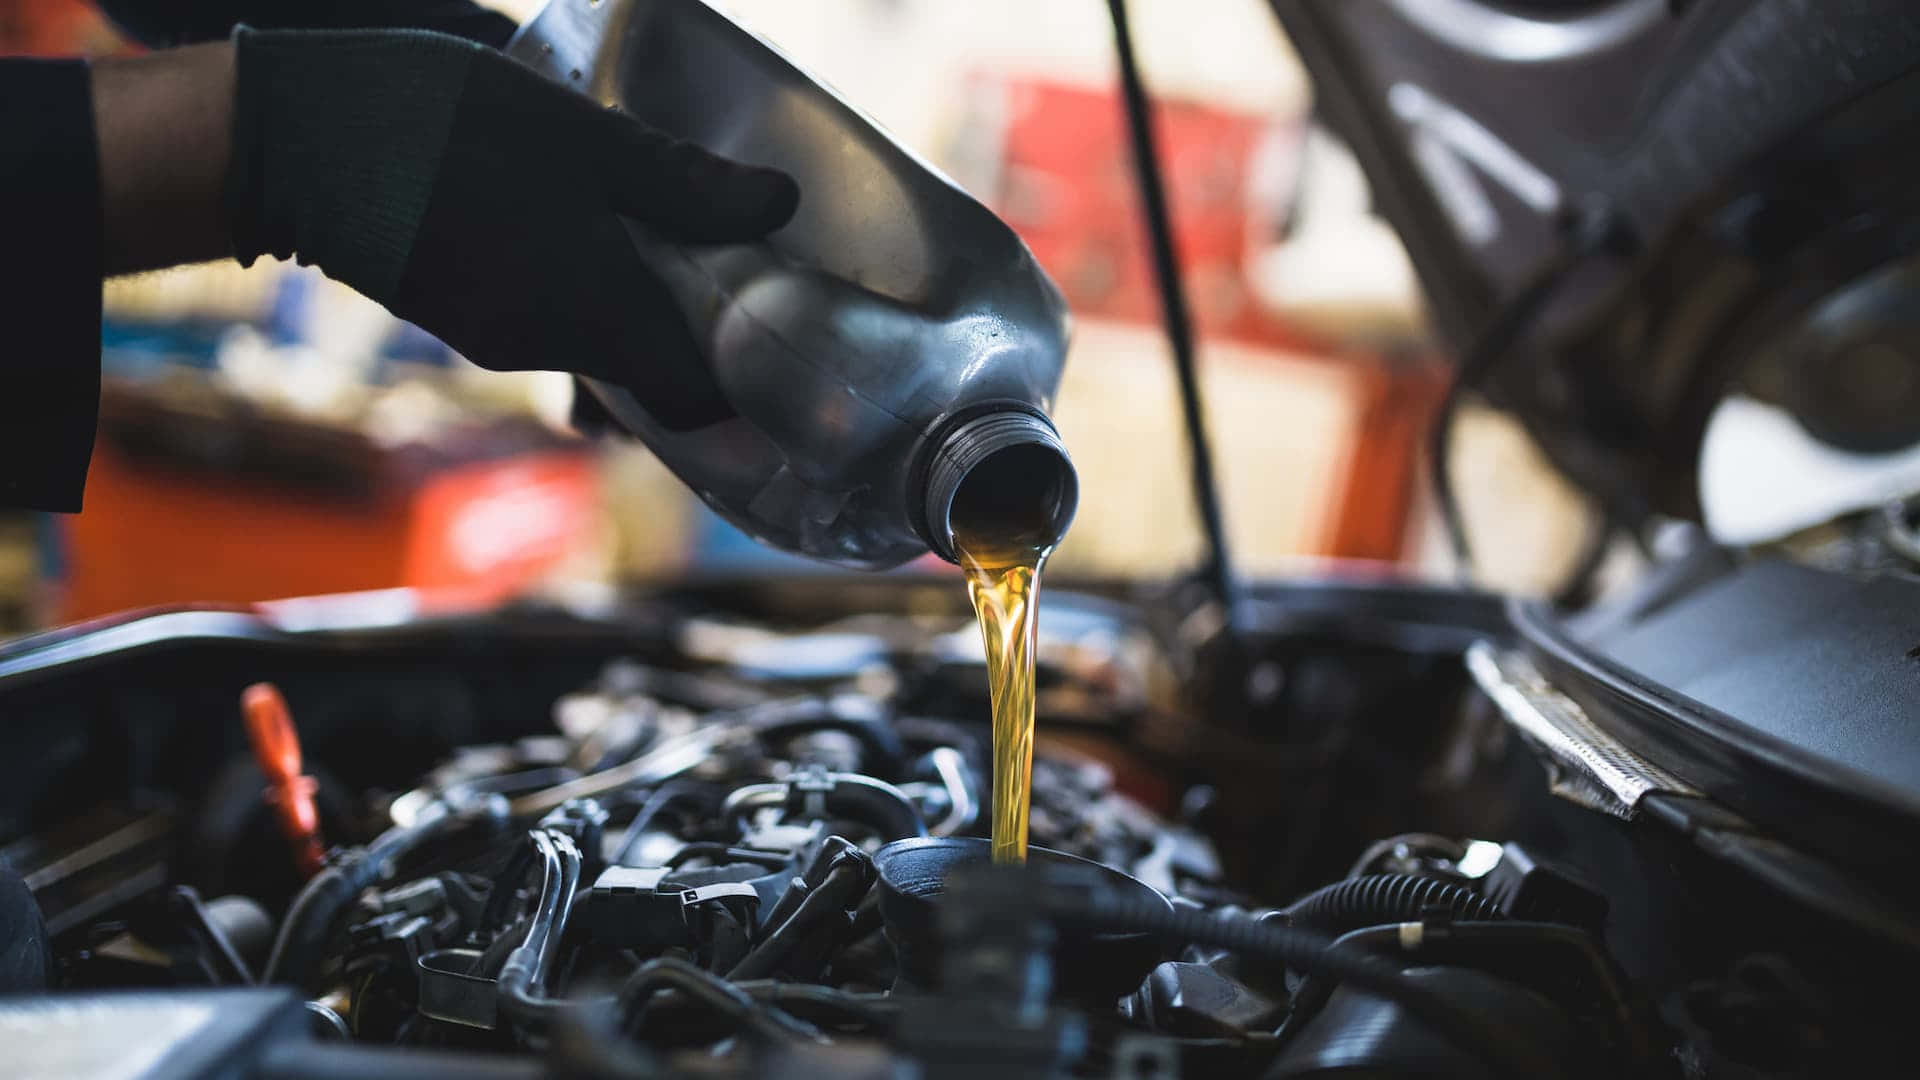 "The Benefits of Regularly Changing Your Engine Oil"